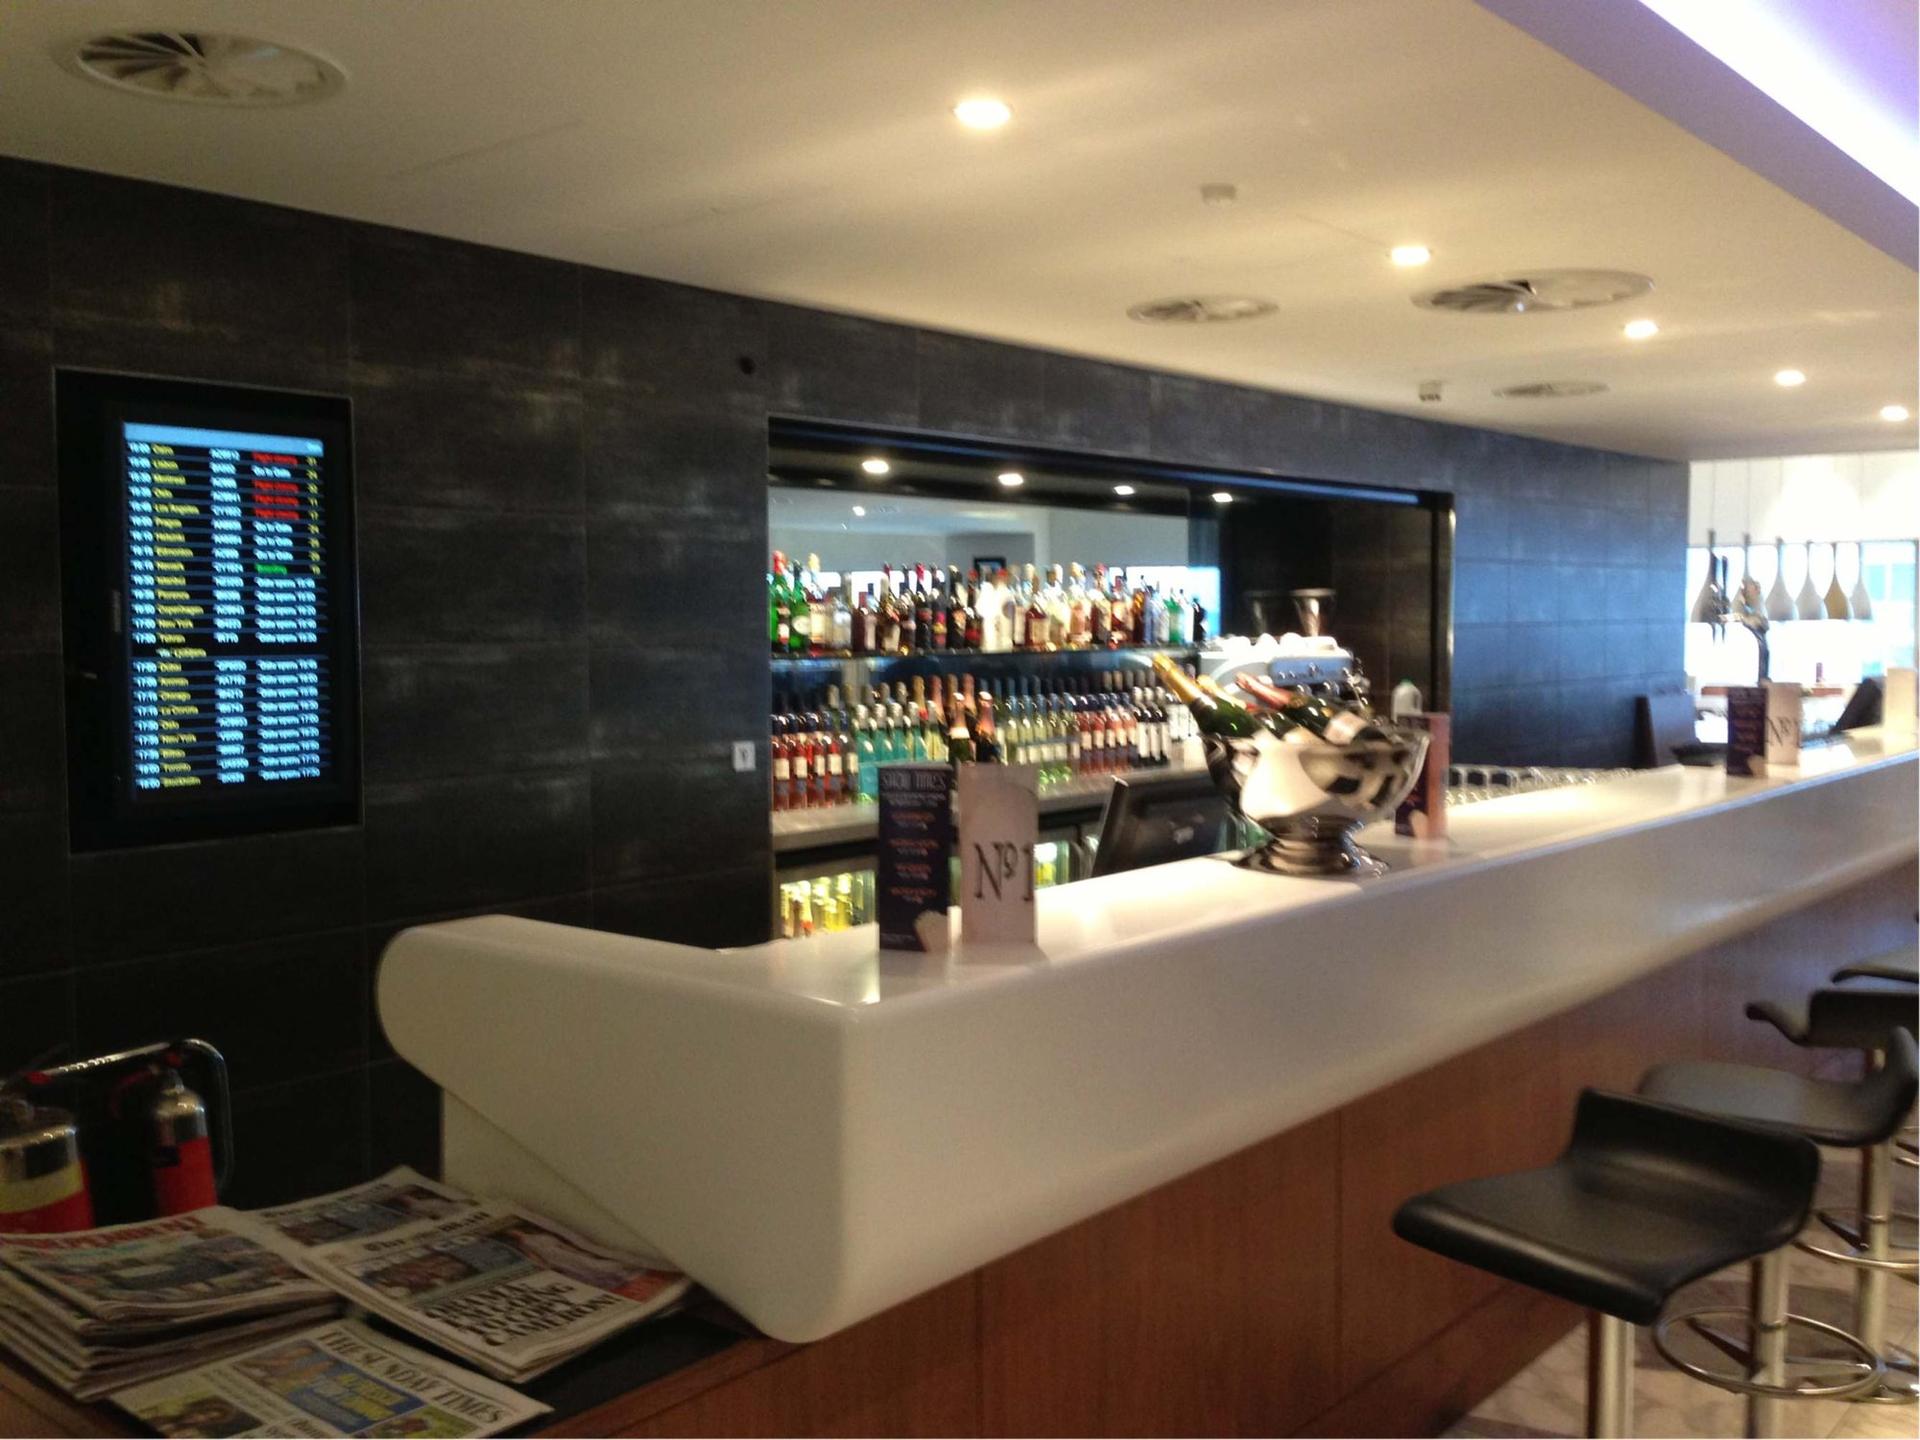 No1 Lounges, Heathrow Terminal 3 image 7 of 33